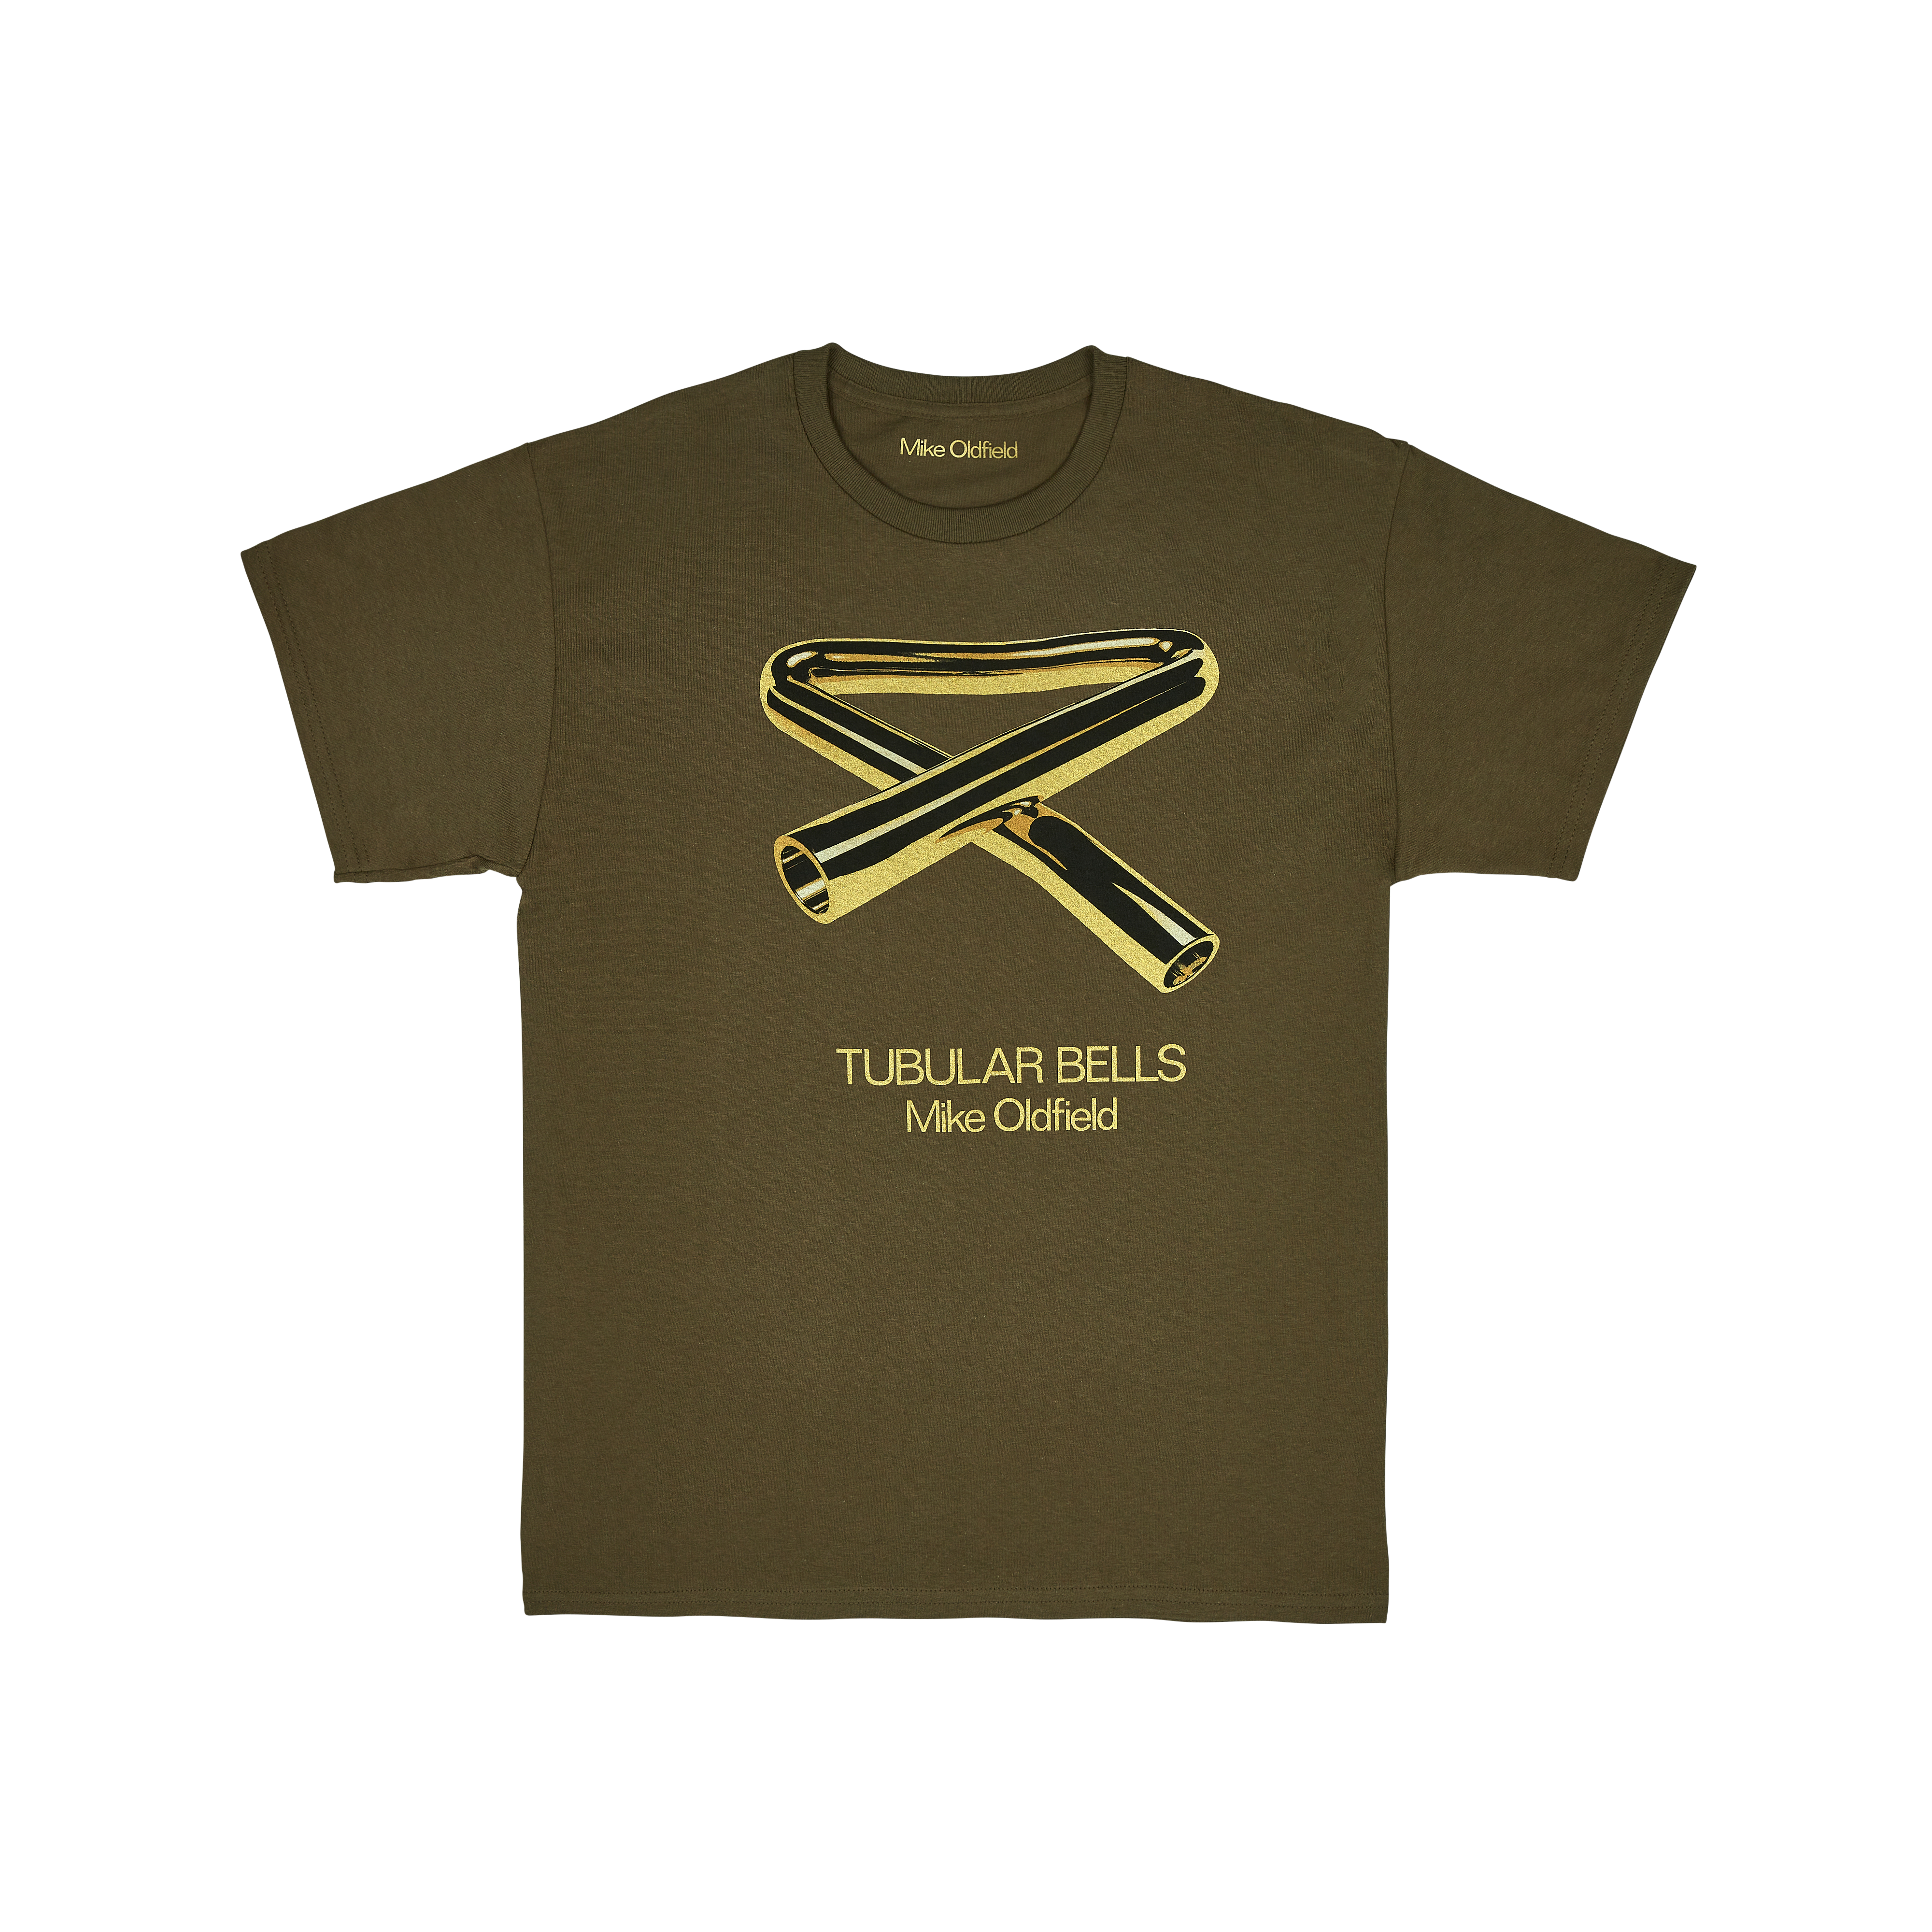 Official Hand Numbered Limited Edition A2 Print (2/2) + Official Tubular Bells Anniversary T-shirt (Olive)